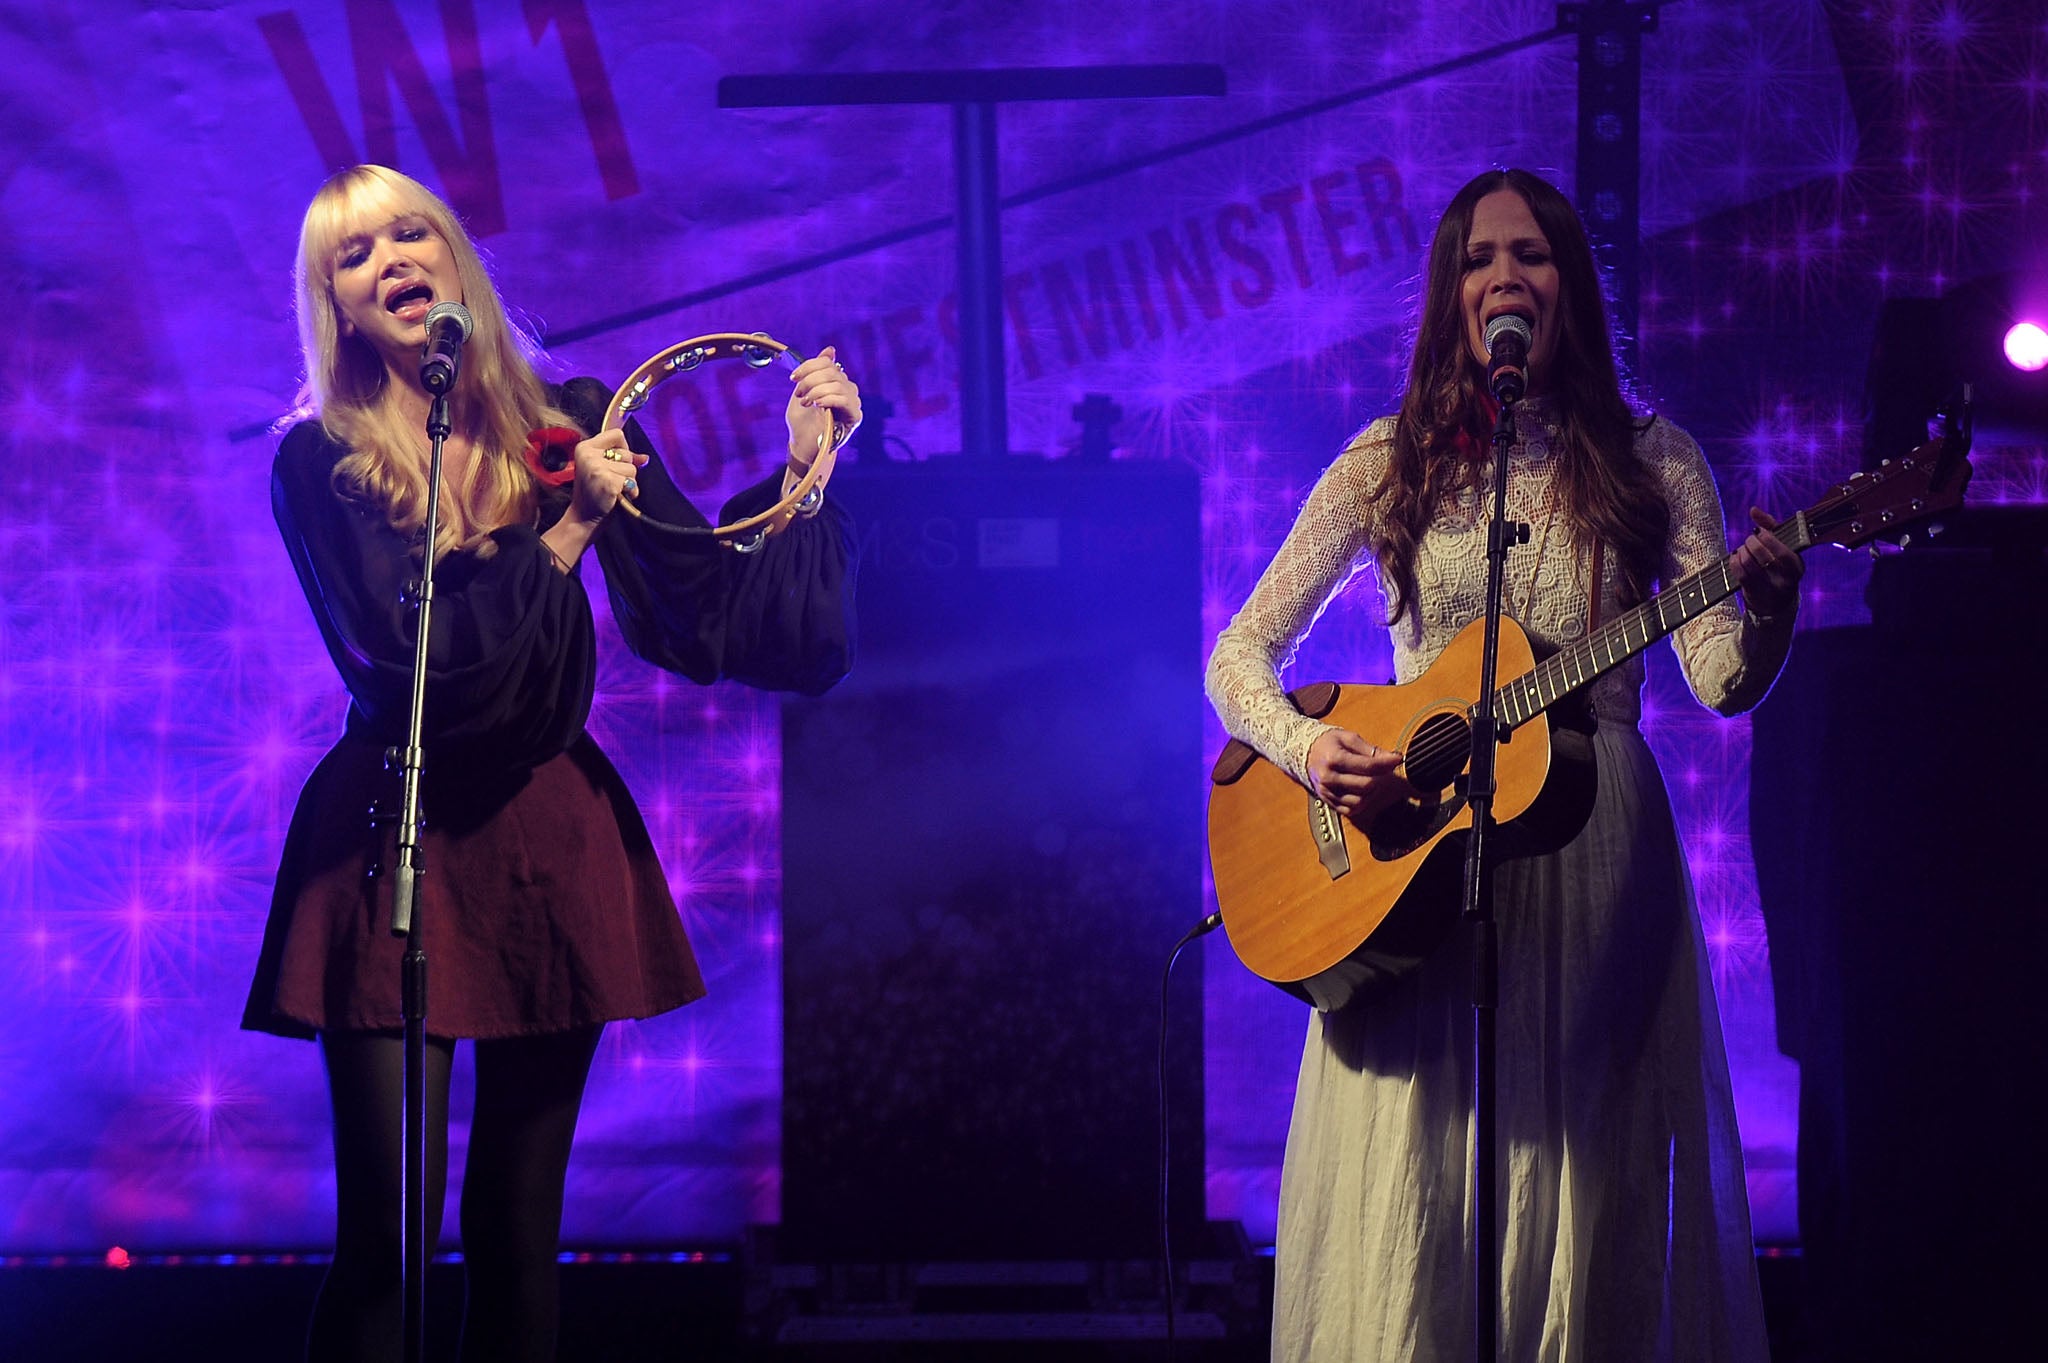 The Pierces perform on stage in London